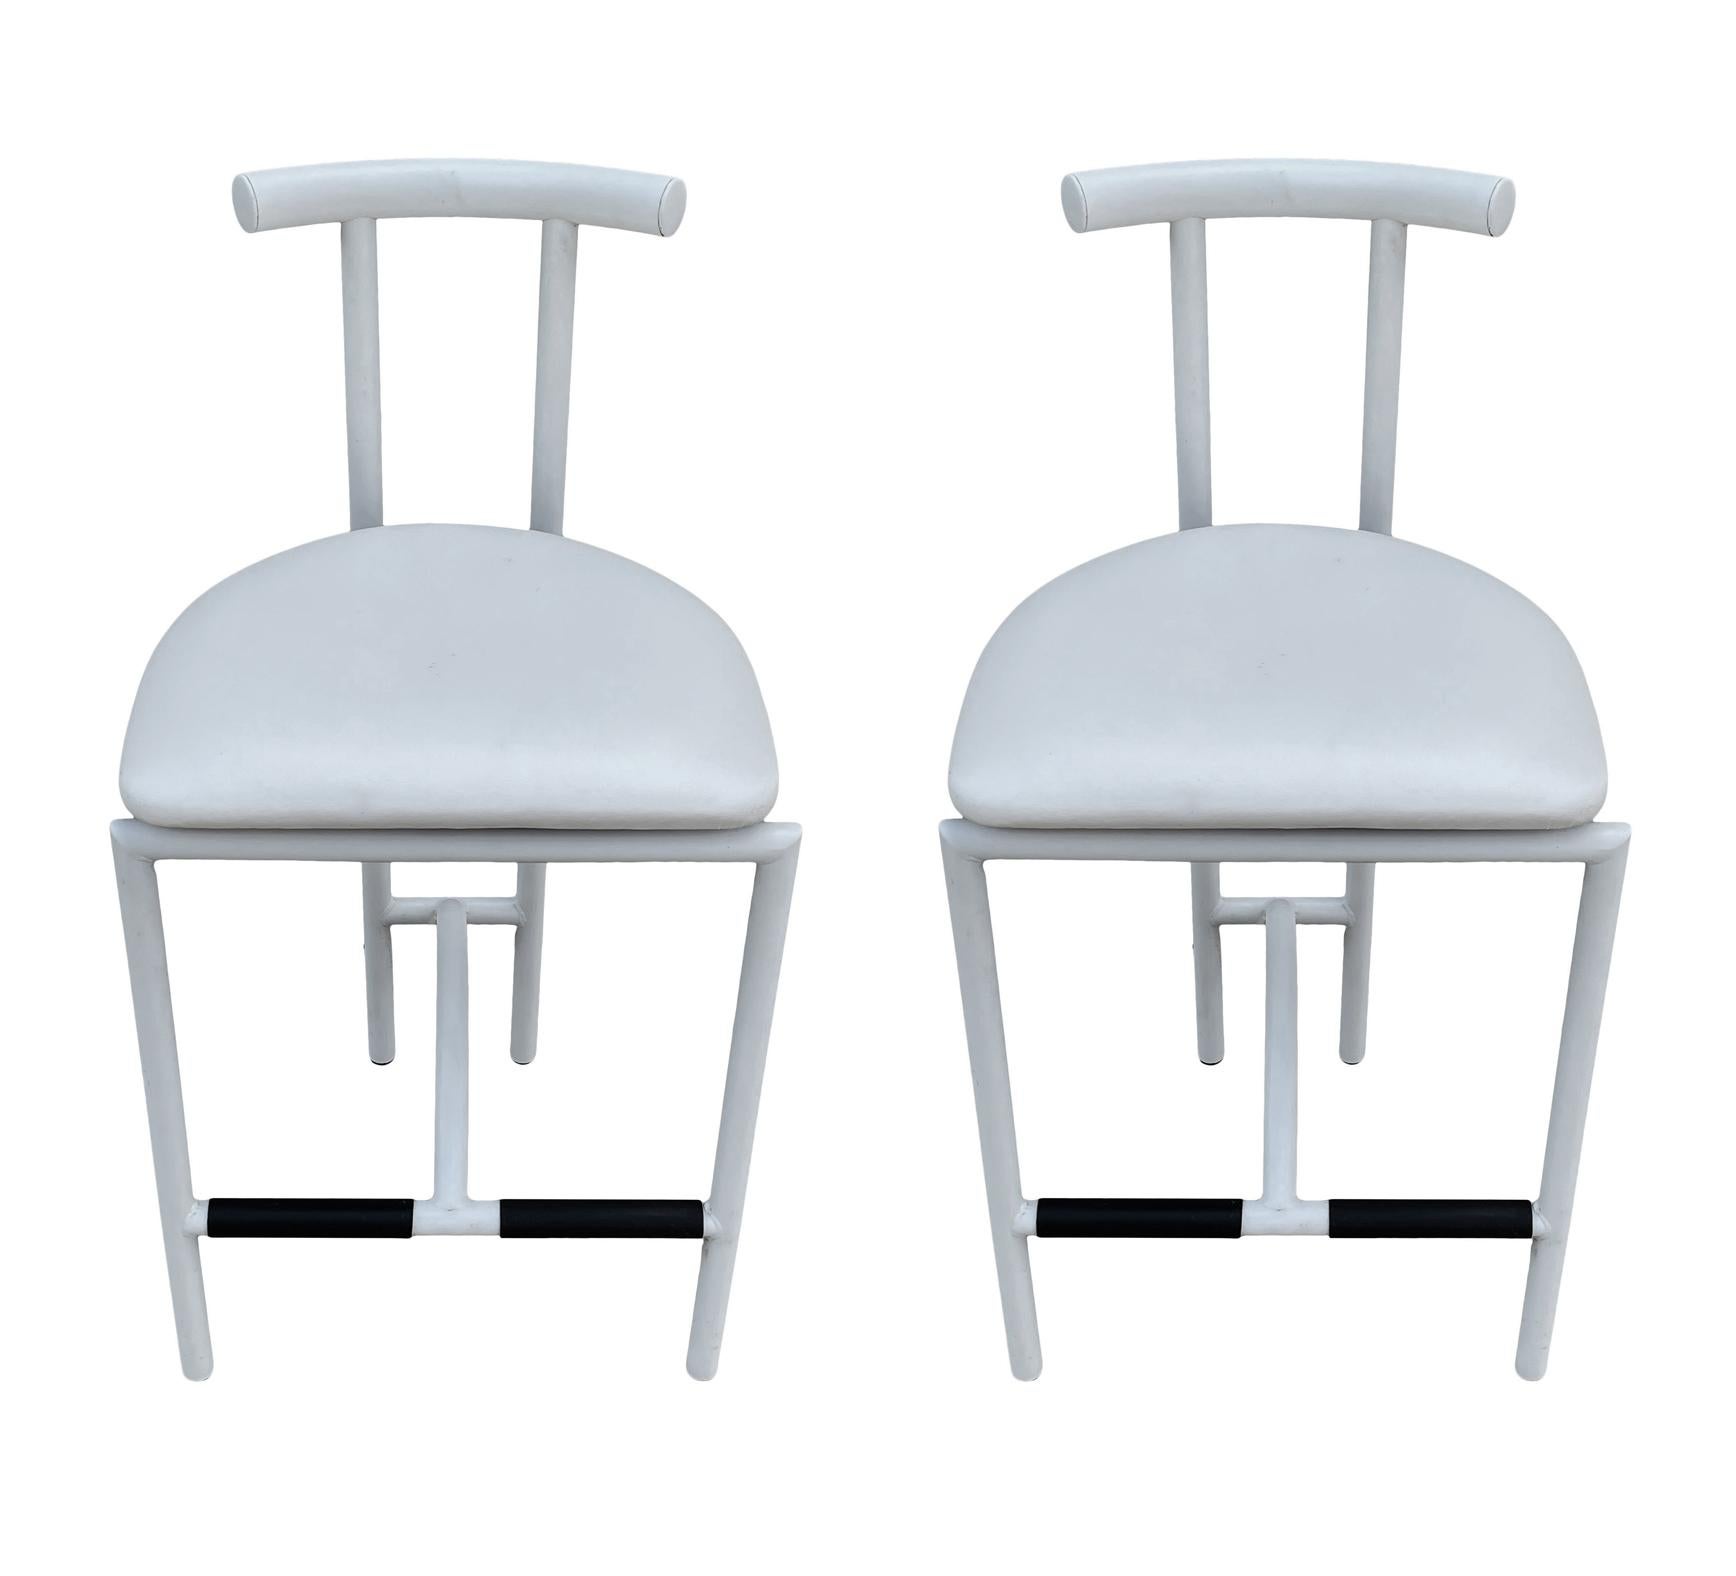 Italian Set of 4 Tokyo Mid Century Post Modern Bar or Counter Stools in White from Italy